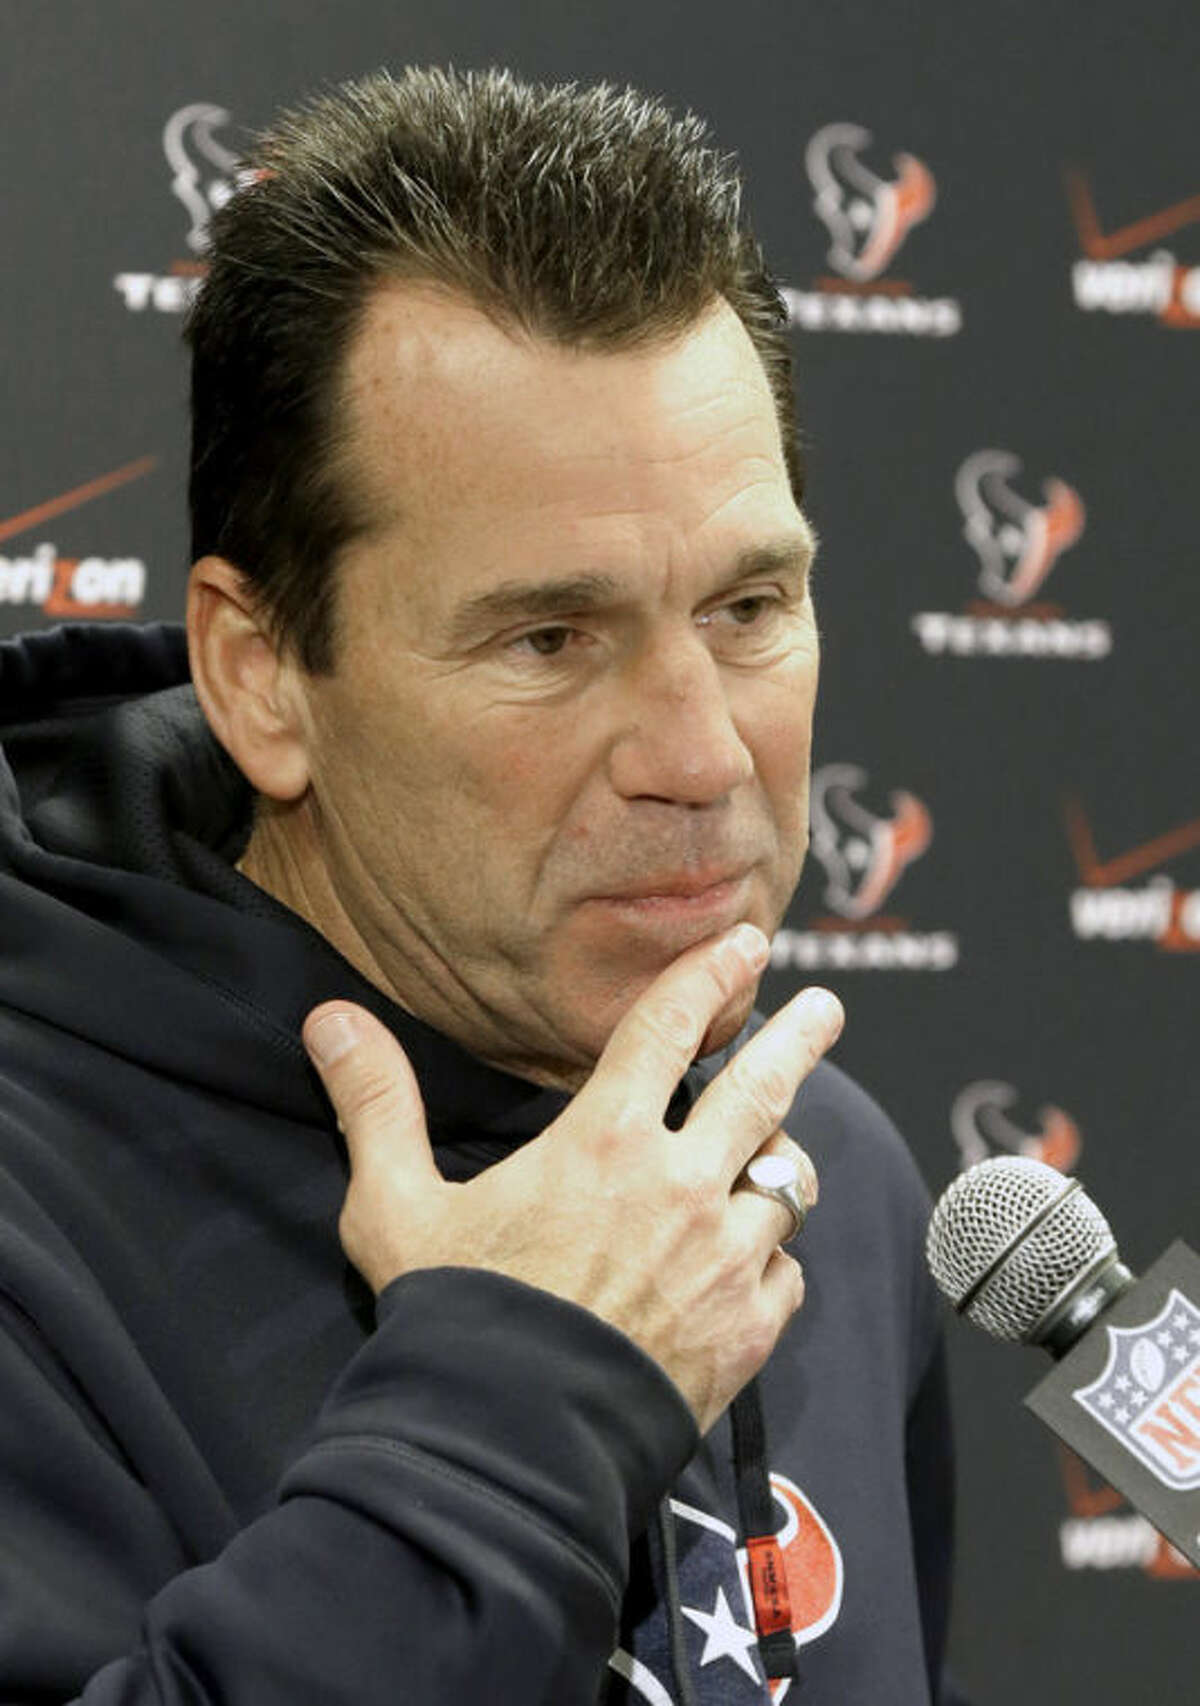 FILE - In this Nov. 13, 2013 file photo, Houston Texans head coach Gary Kubiak speaks to the media in Houston. The Texans have fired coach Kubiak. The team announced the decision Friday, Dec. 6, 2013, one day after the Texans lost their 11th straight game, 27-20 at Jacksonville. (AP Photo/Pat Sullivan, FIle)